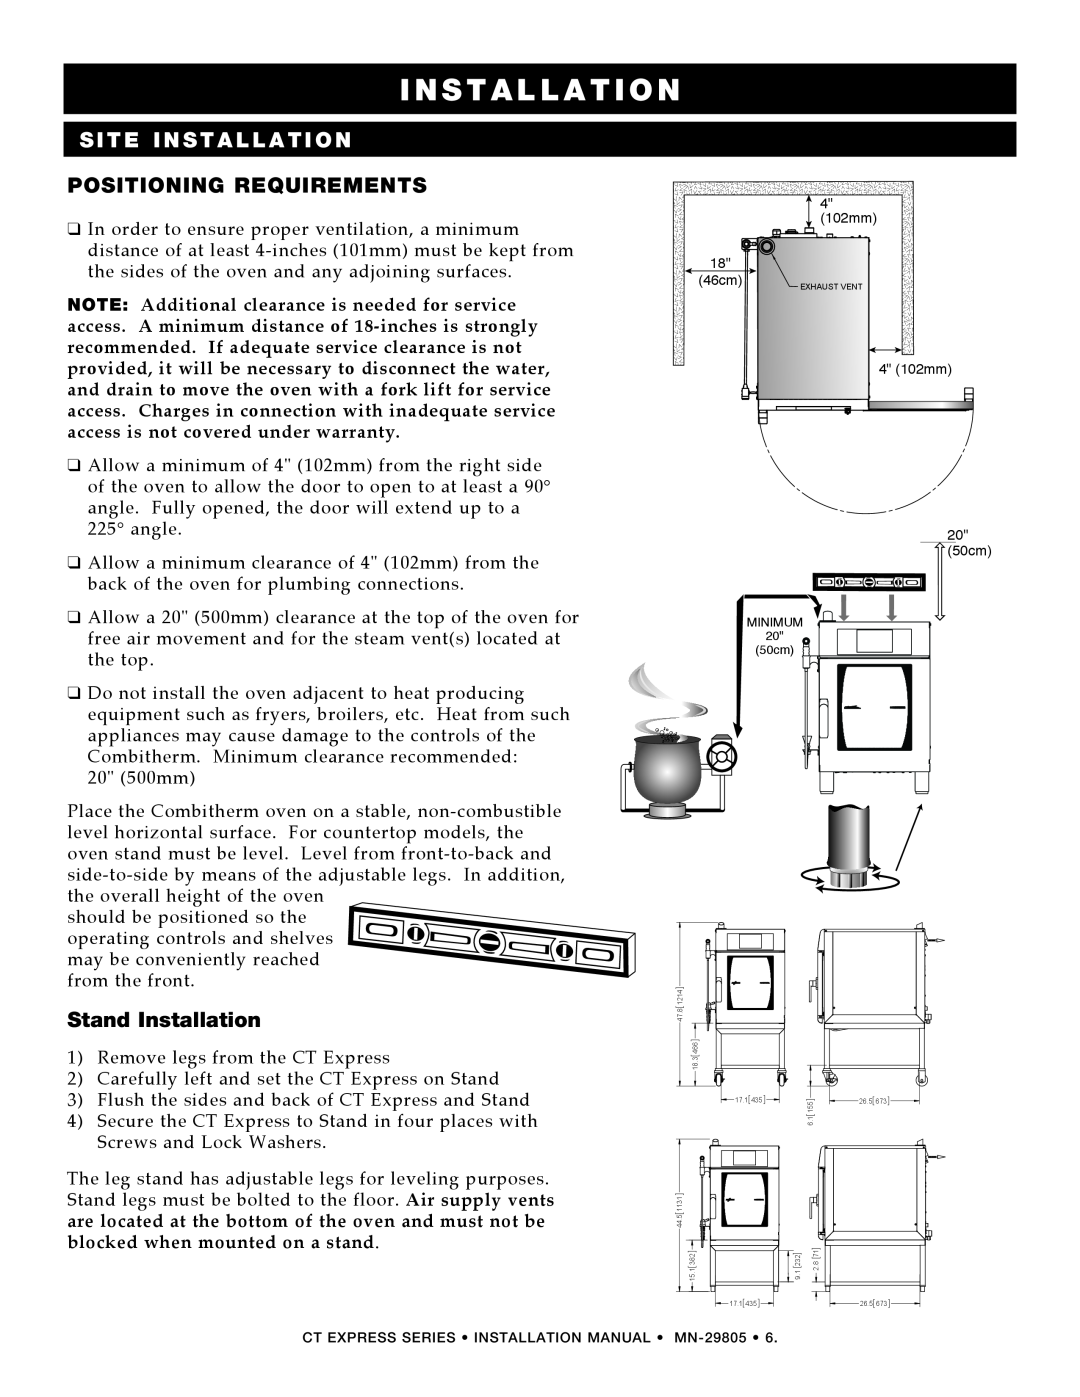 Alto-Shaam Combination Oven/Steamer manual Positioning Requirements, Stand Installation, I N S T A L L A T I O N 